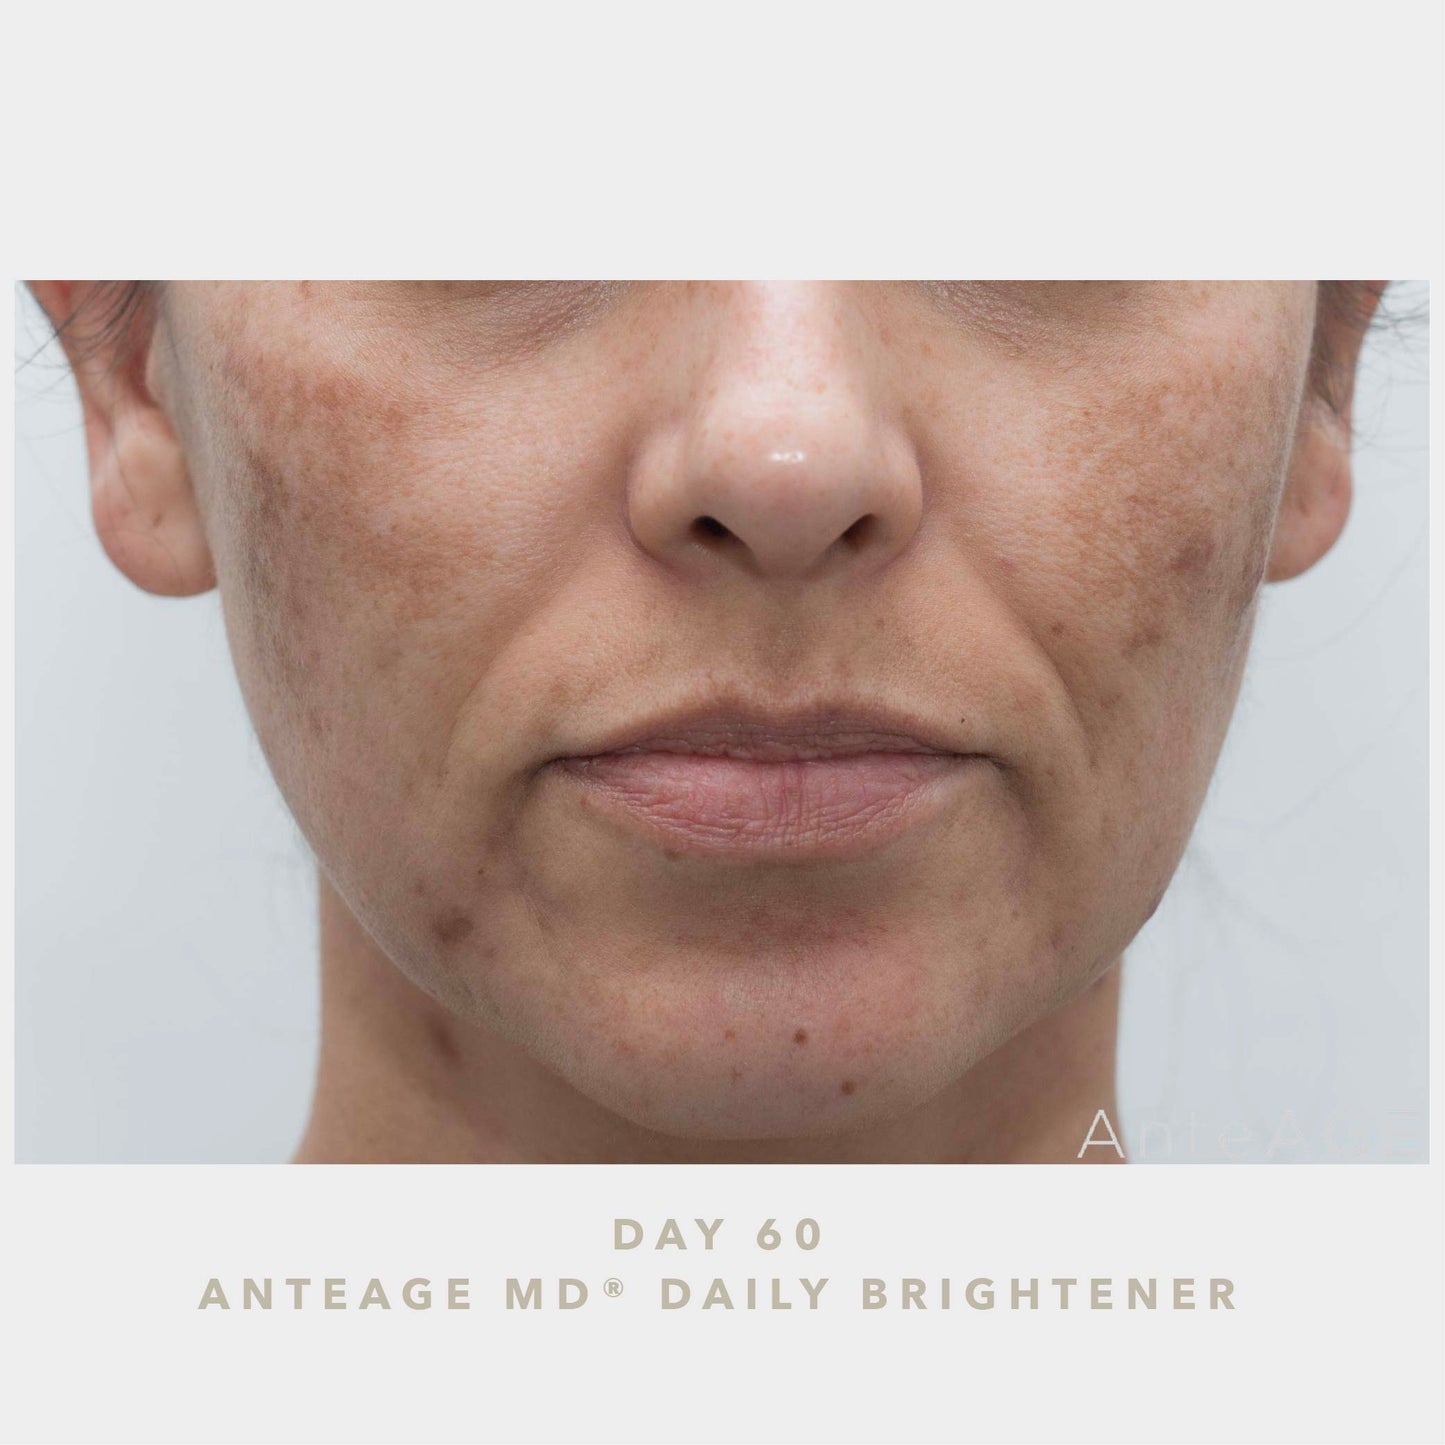 AnteAGE MD Brightener AFTER Photo